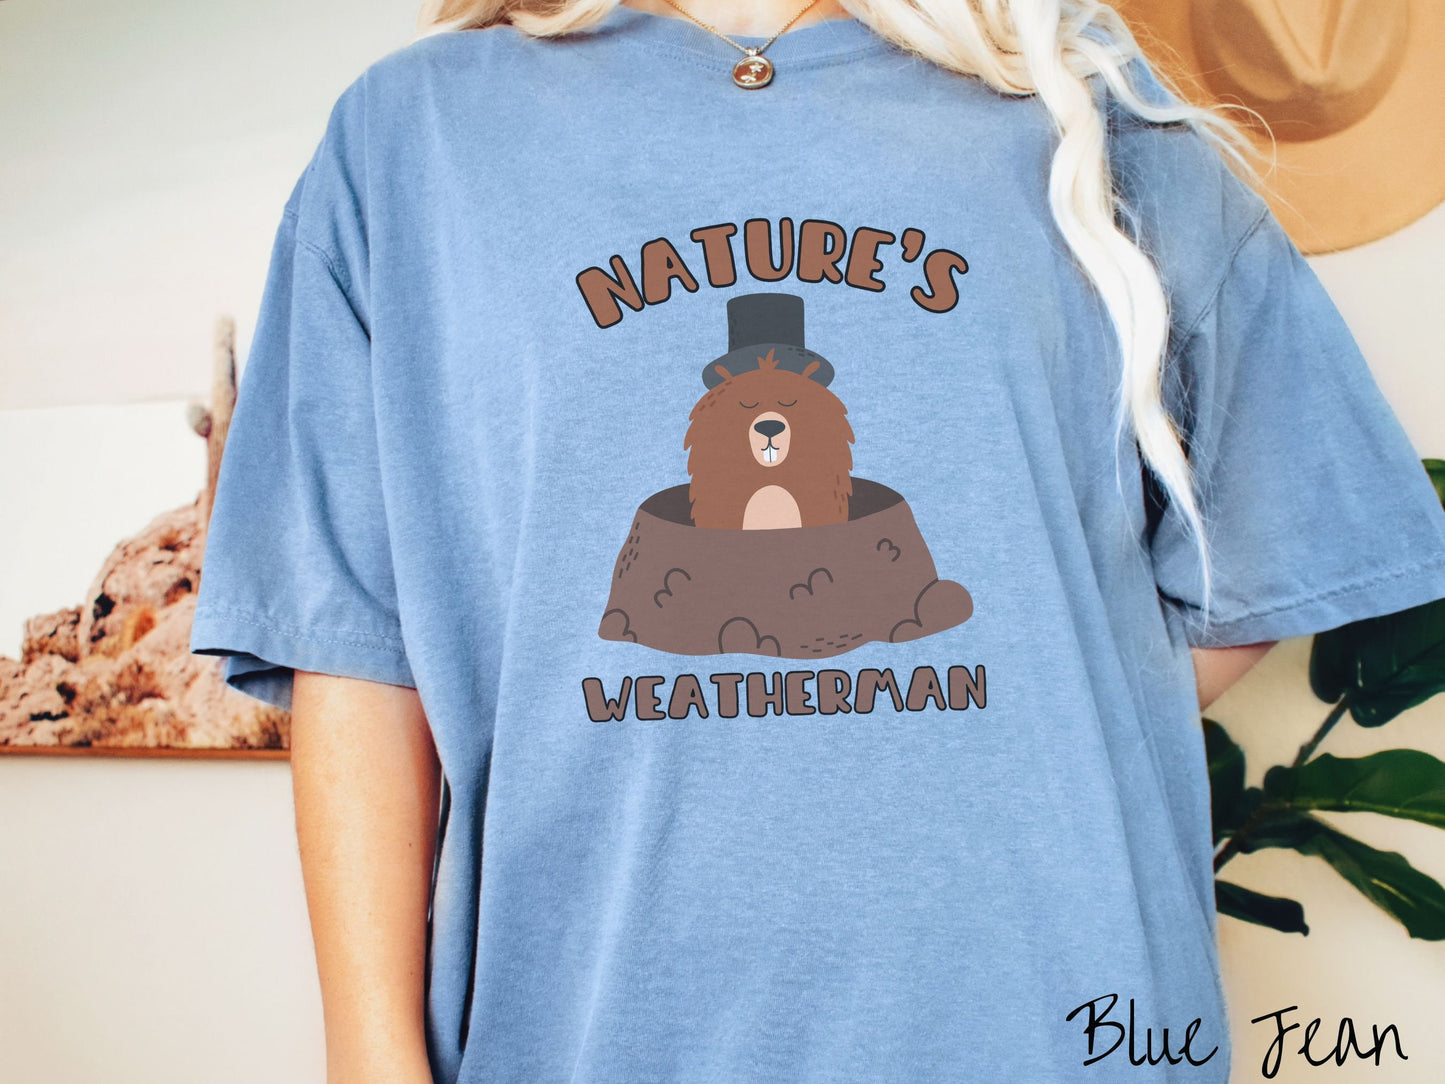 A woman wearing a cute blue jean colored shirt with the text Natures Weatherman sandwiching Phil the Punxsutawney PA groundhog who is wearing a black top hat and is coming out of his hole for Groundhogs Day.